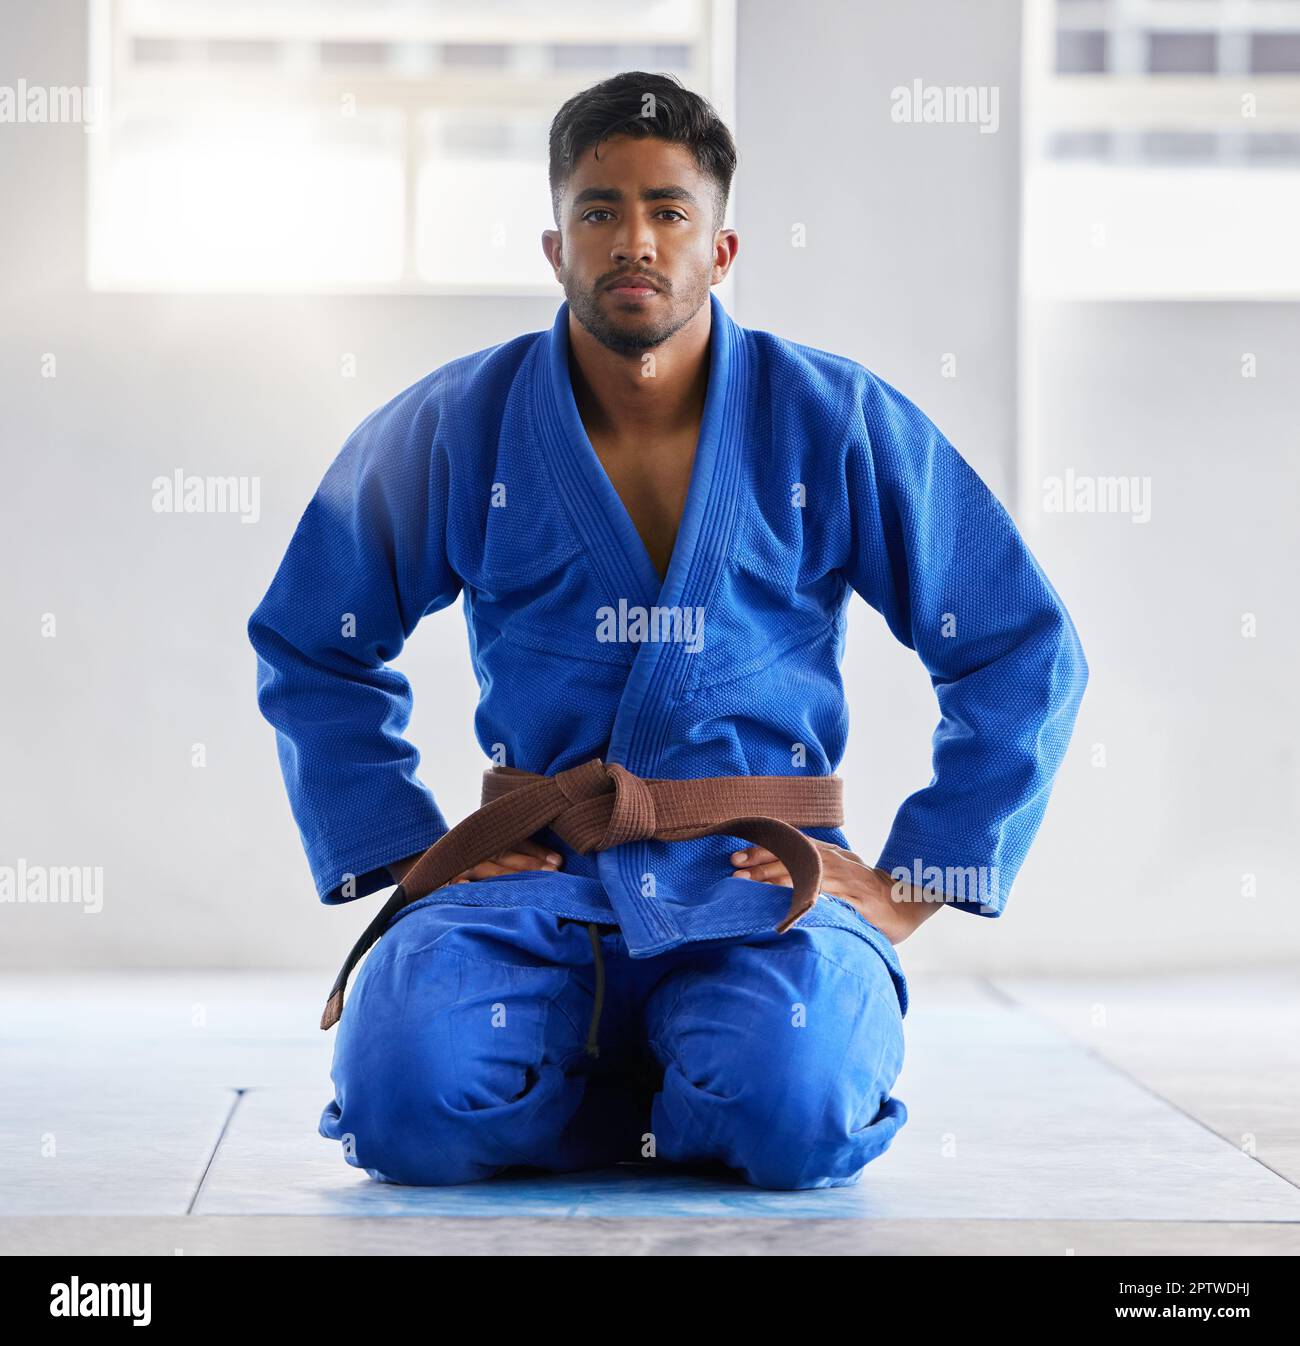 Karate, training and portrait of a coach ready for martial arts, fight and self defense sport at a gym. Fitness, focus and man in a uniform with a bro Stock Photo